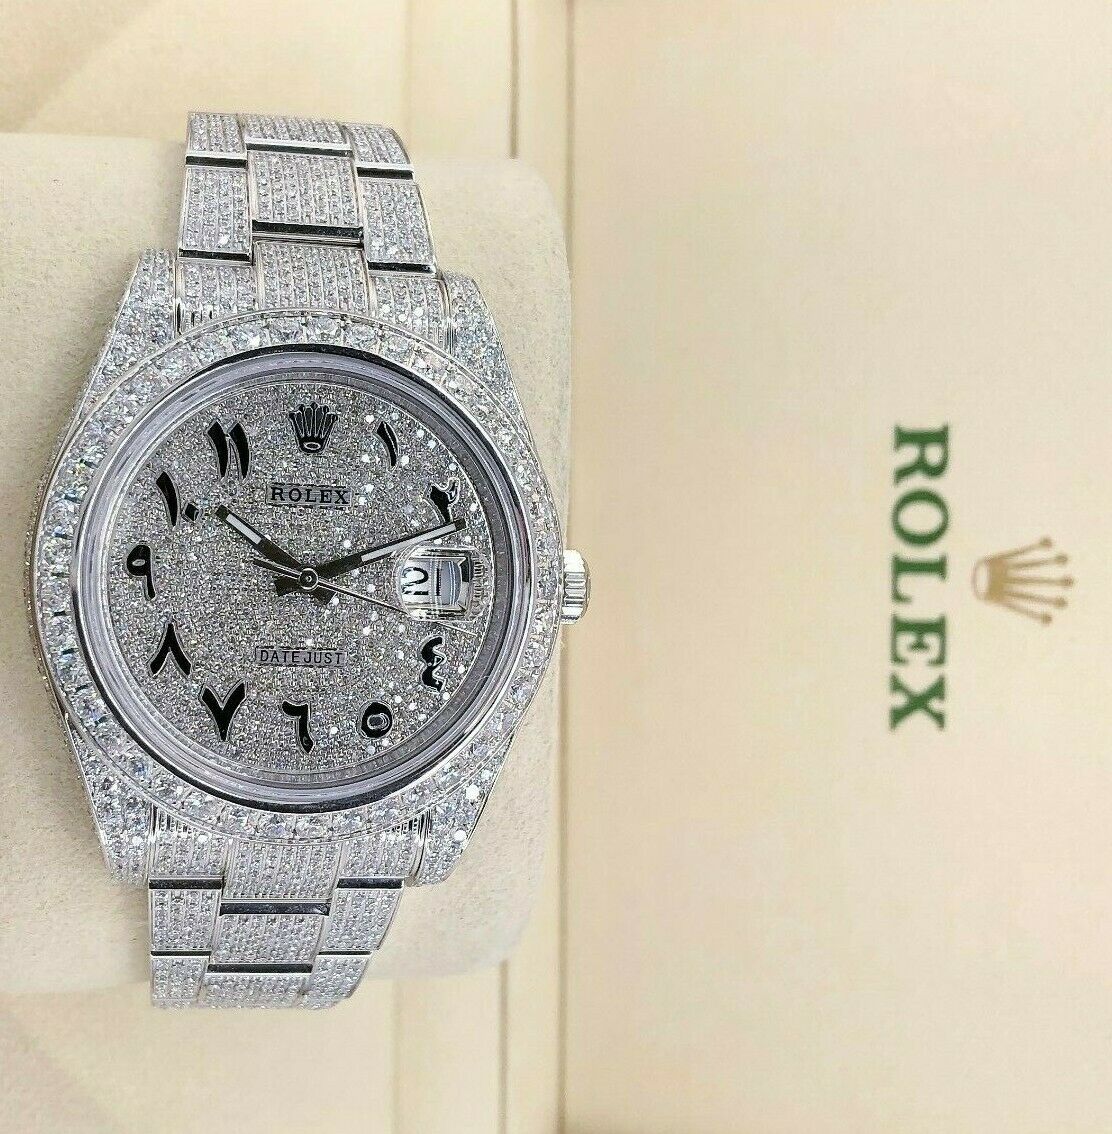 Rolex Datejust II 41mm 12 Carats Diamond Bust Down Iced Out Steel Watch 116300